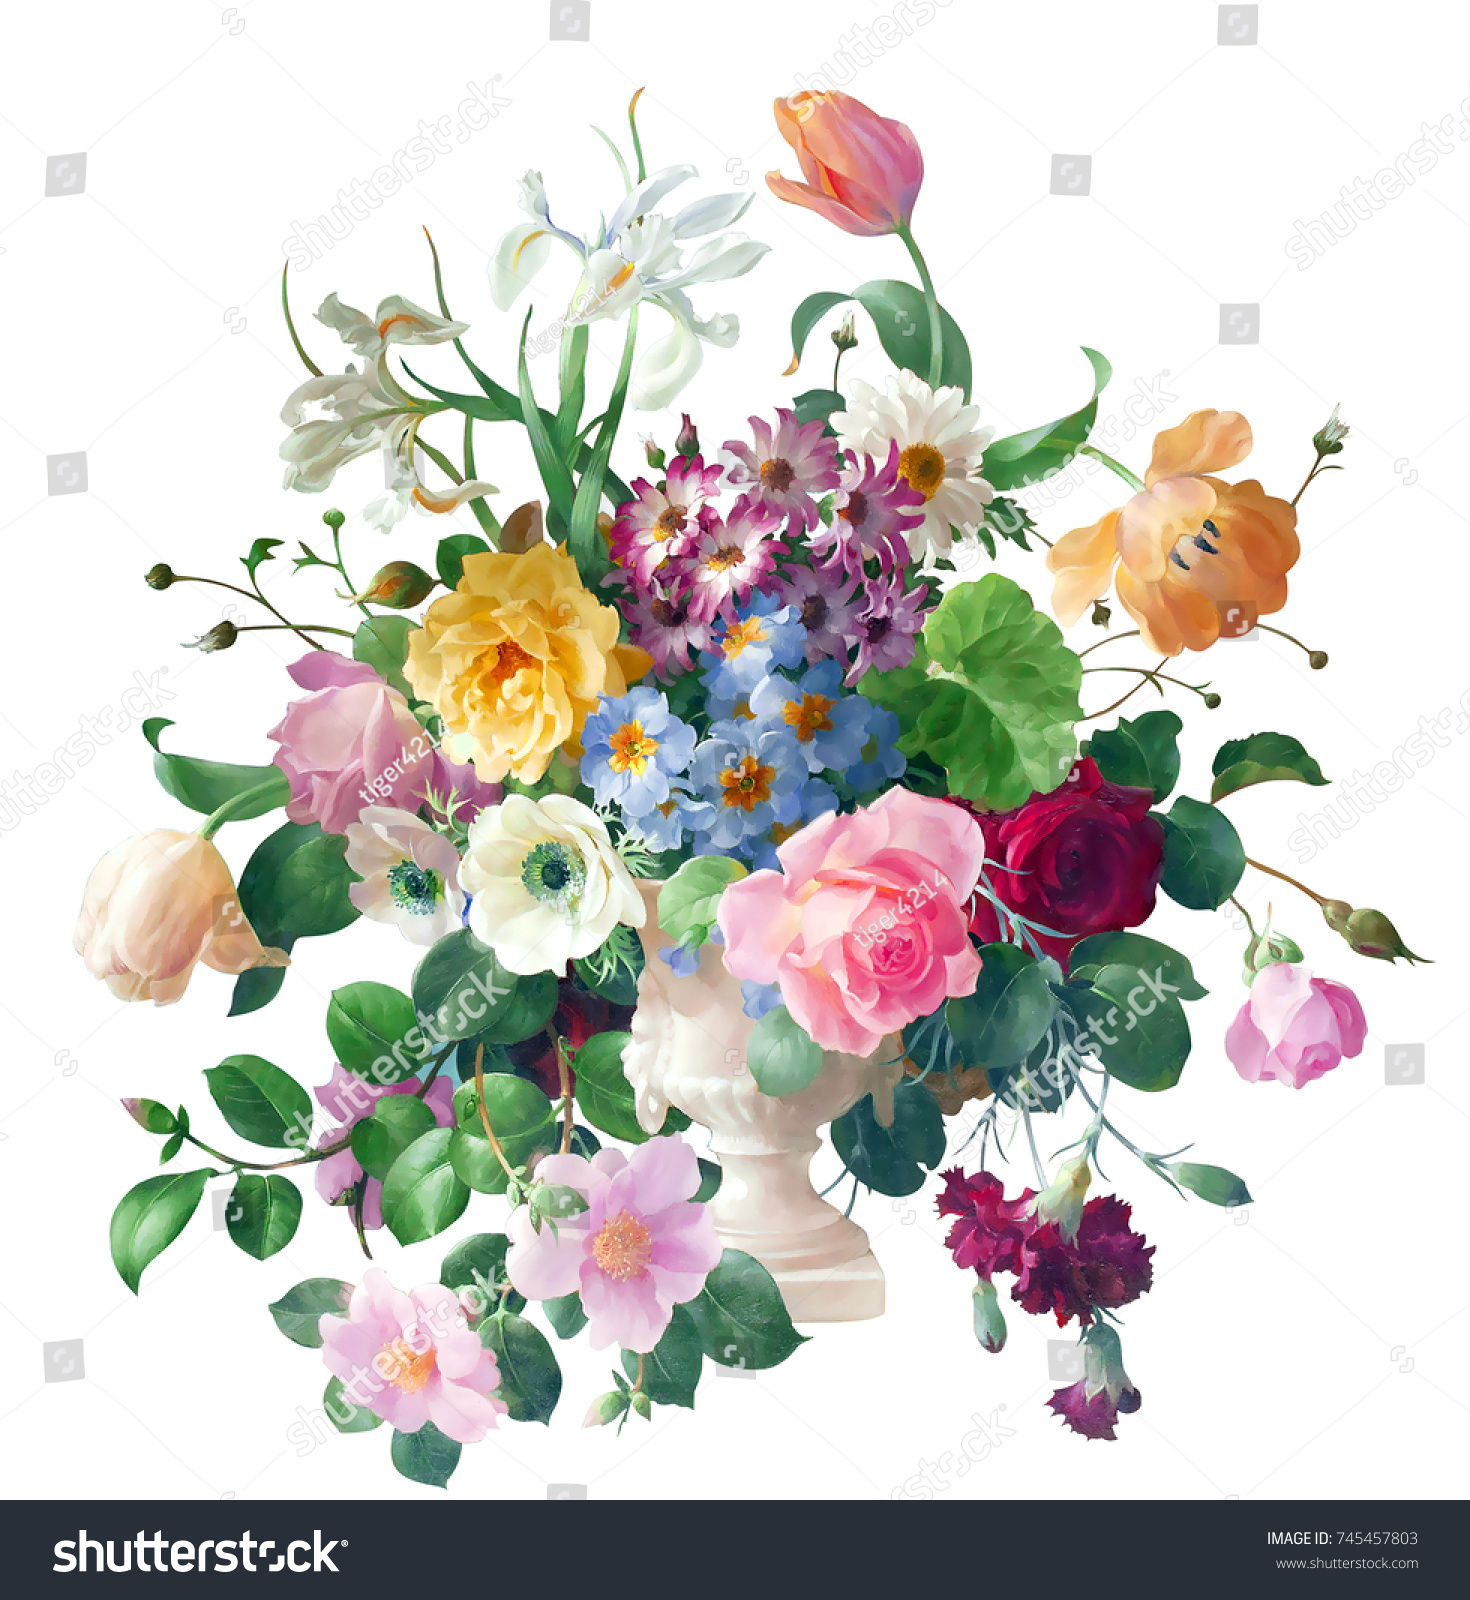 Fragrant Flowers Blossoming All Year Round Stock Illustration 745457803 ...